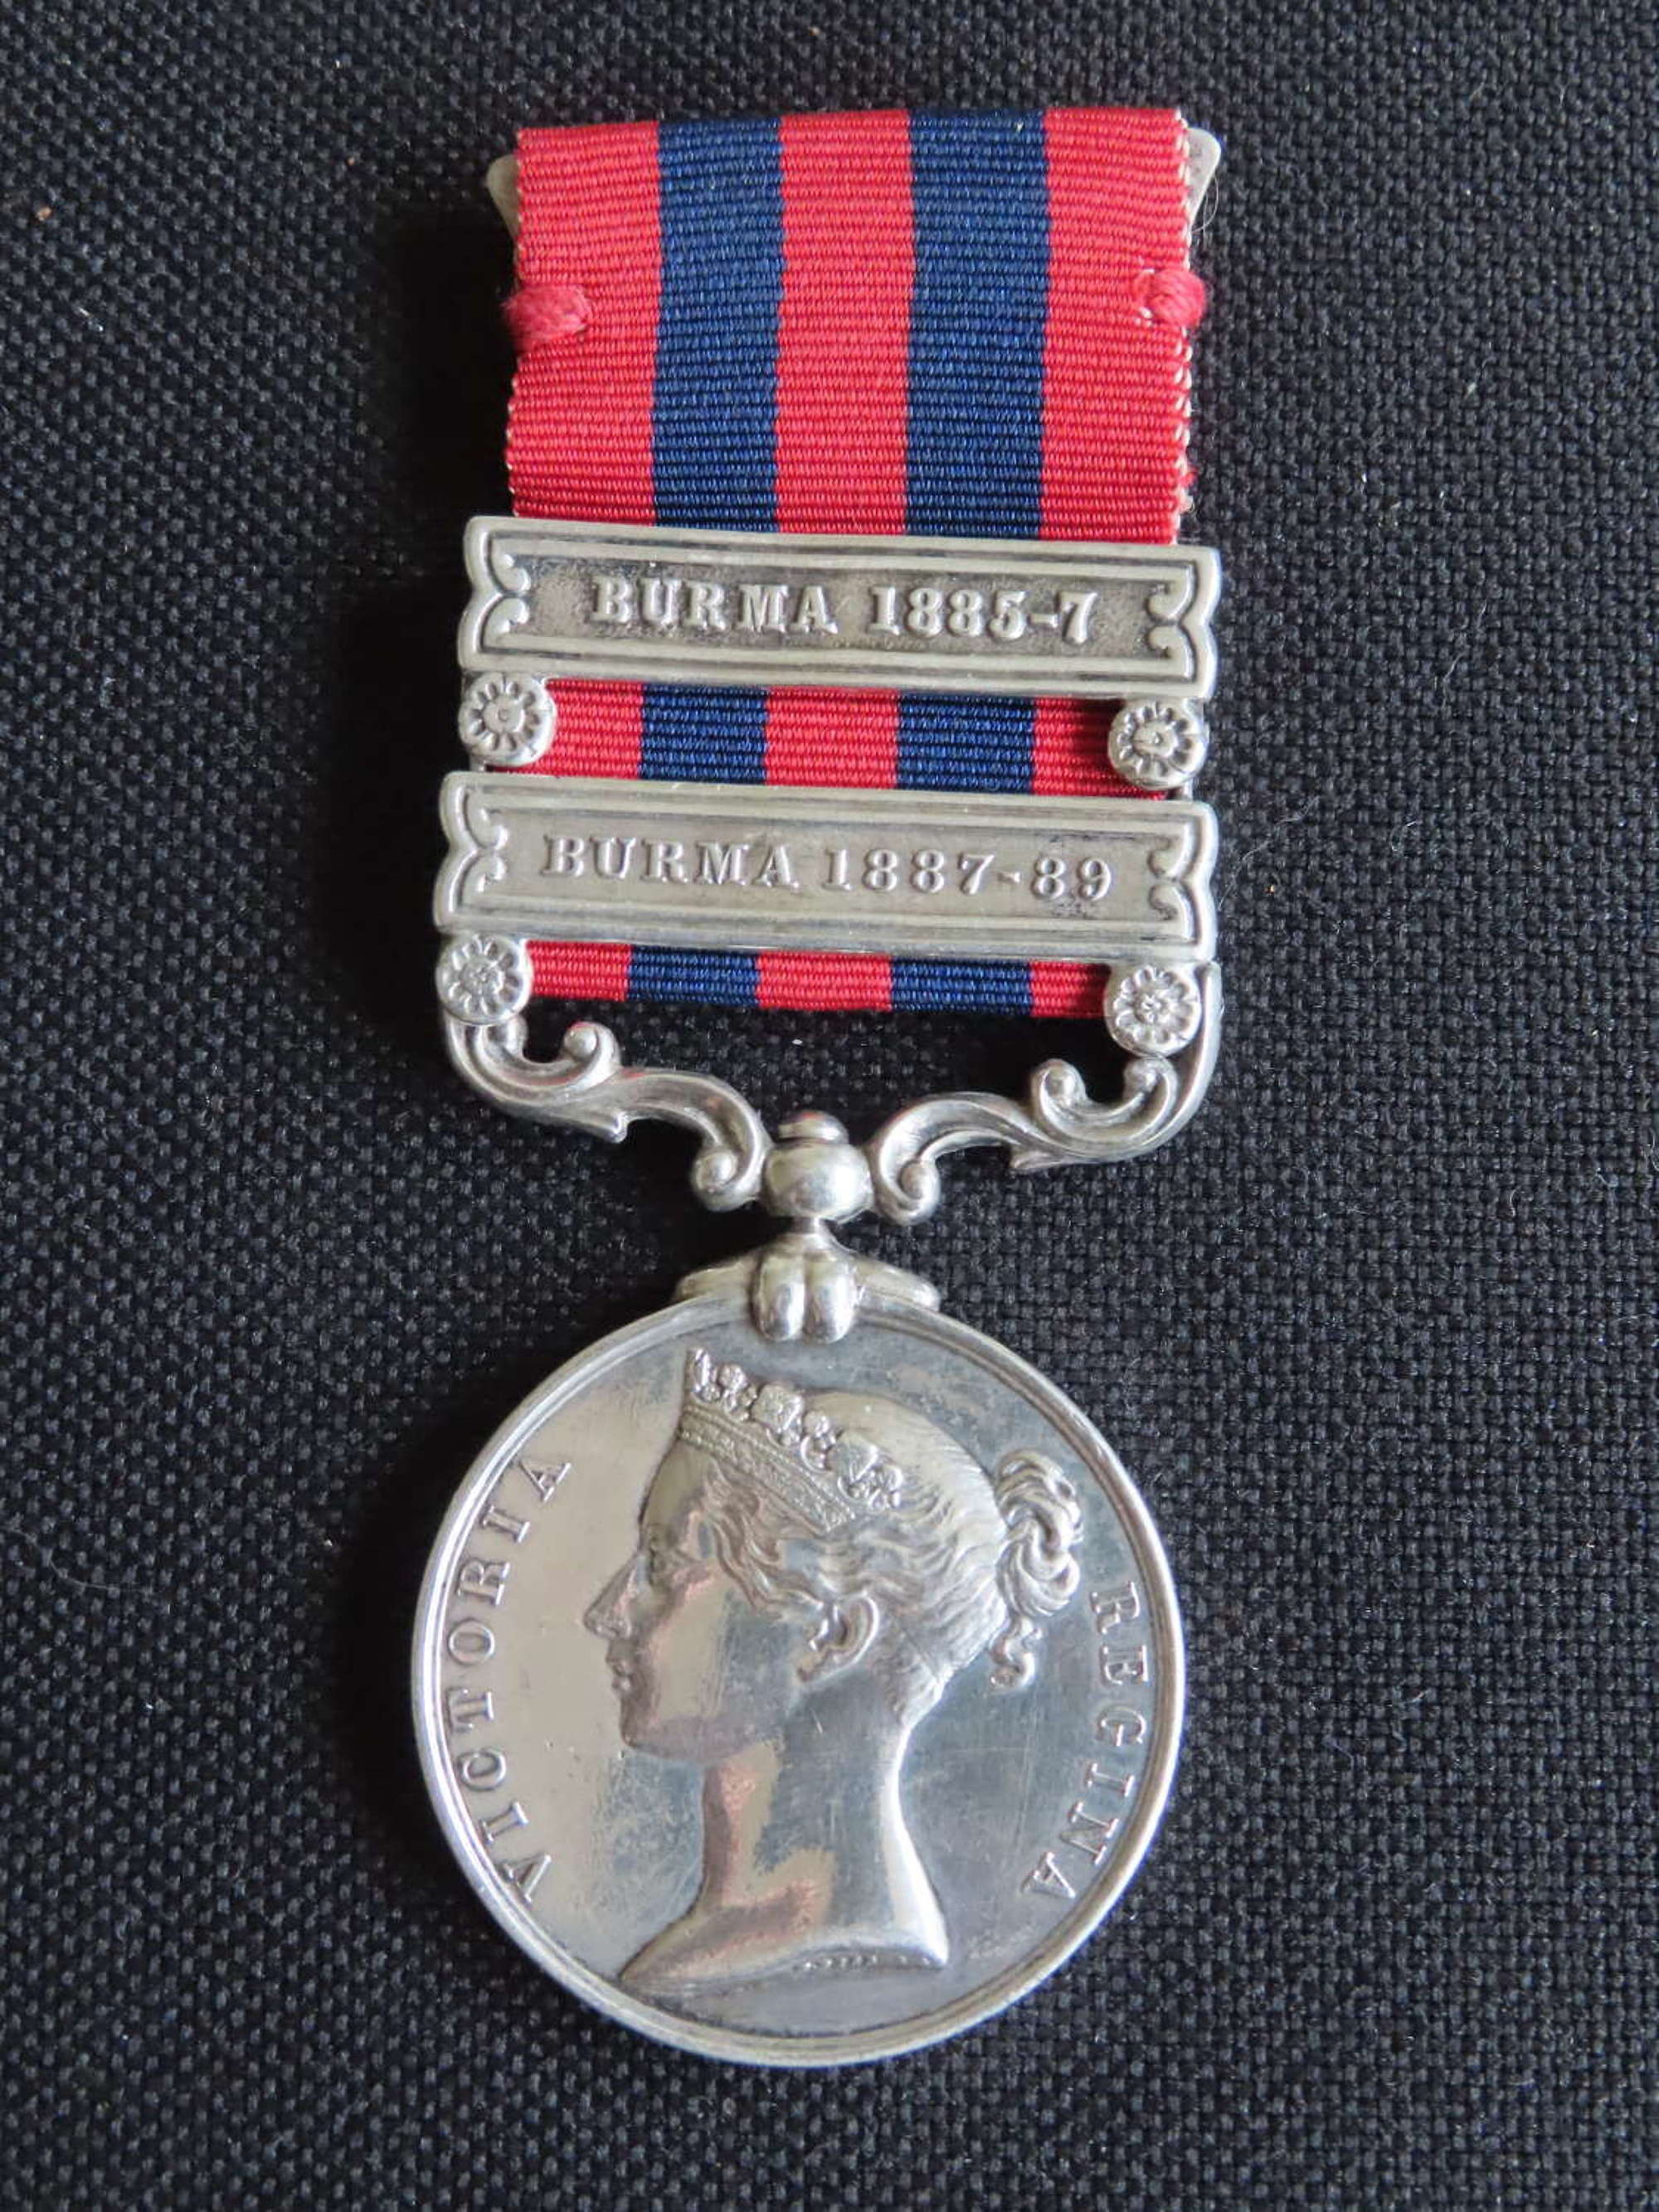 Two Clasp India General Service Medal Cpl Ringland Munster Fusiliers